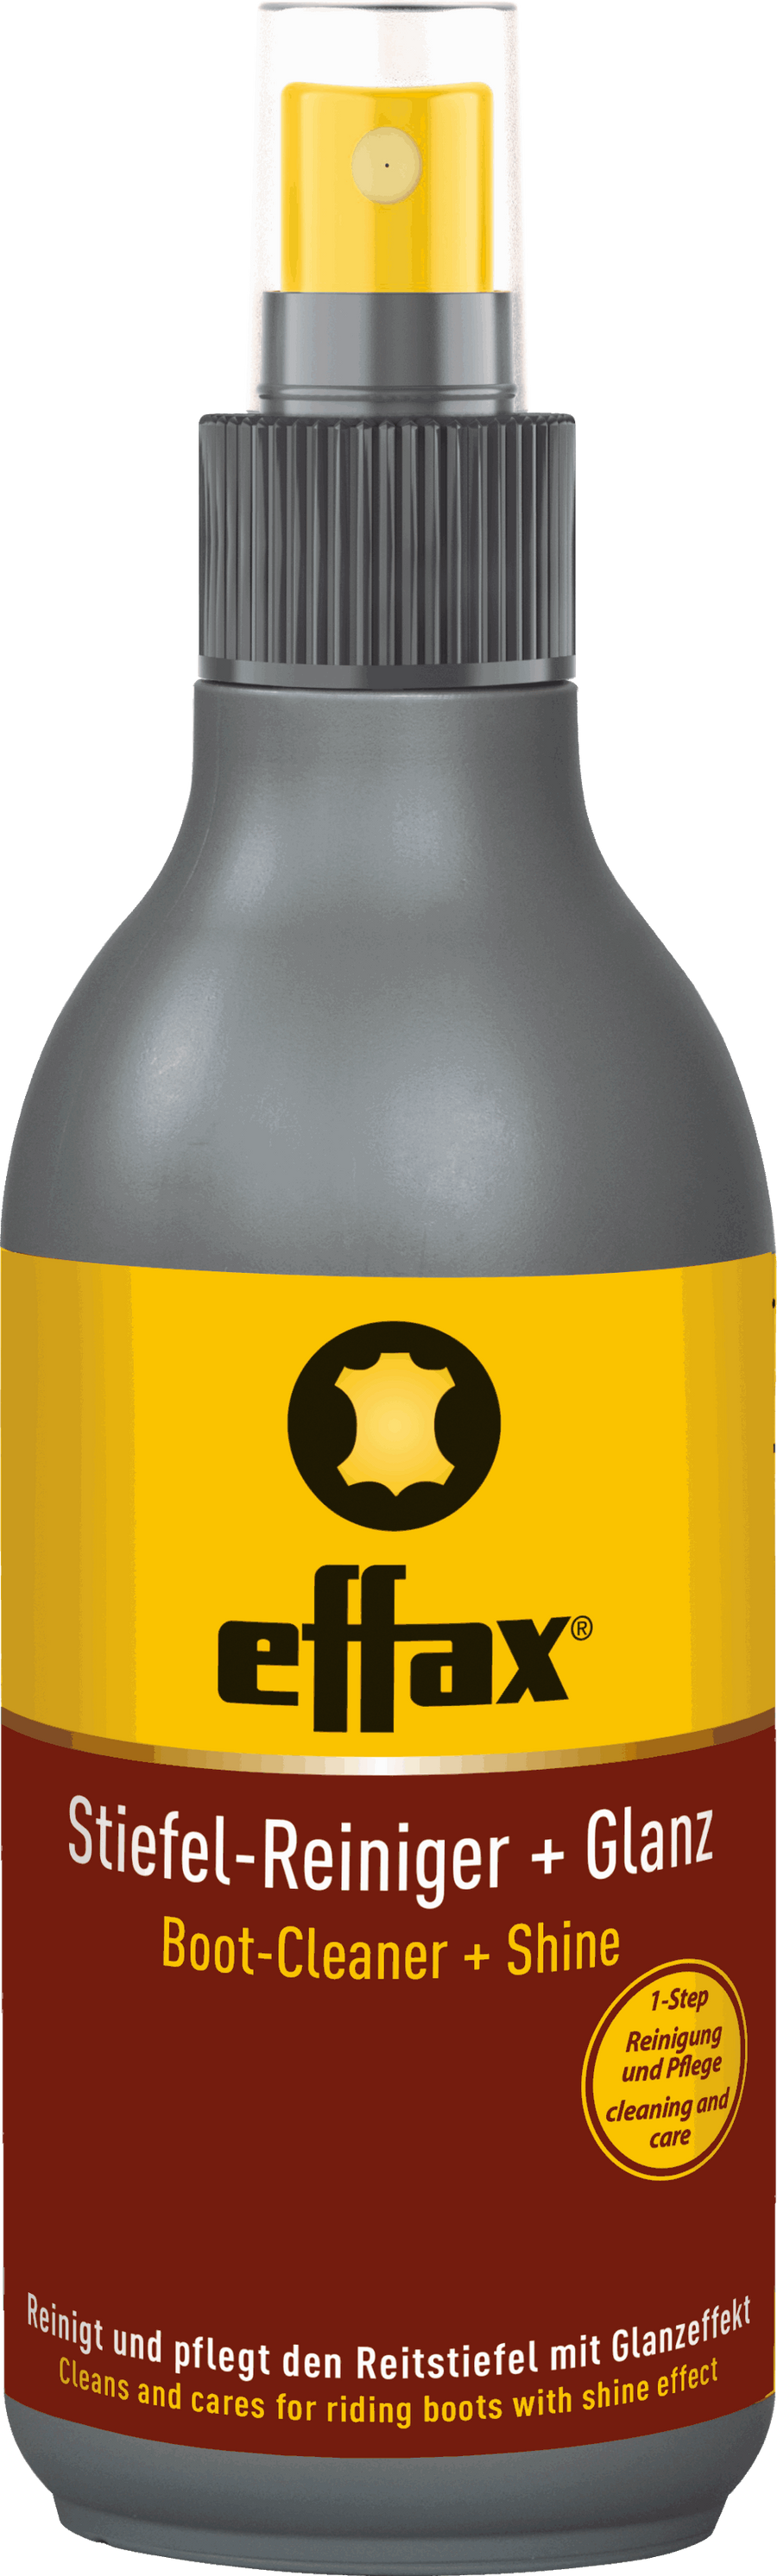 Effax Boot Cleaner and Shine